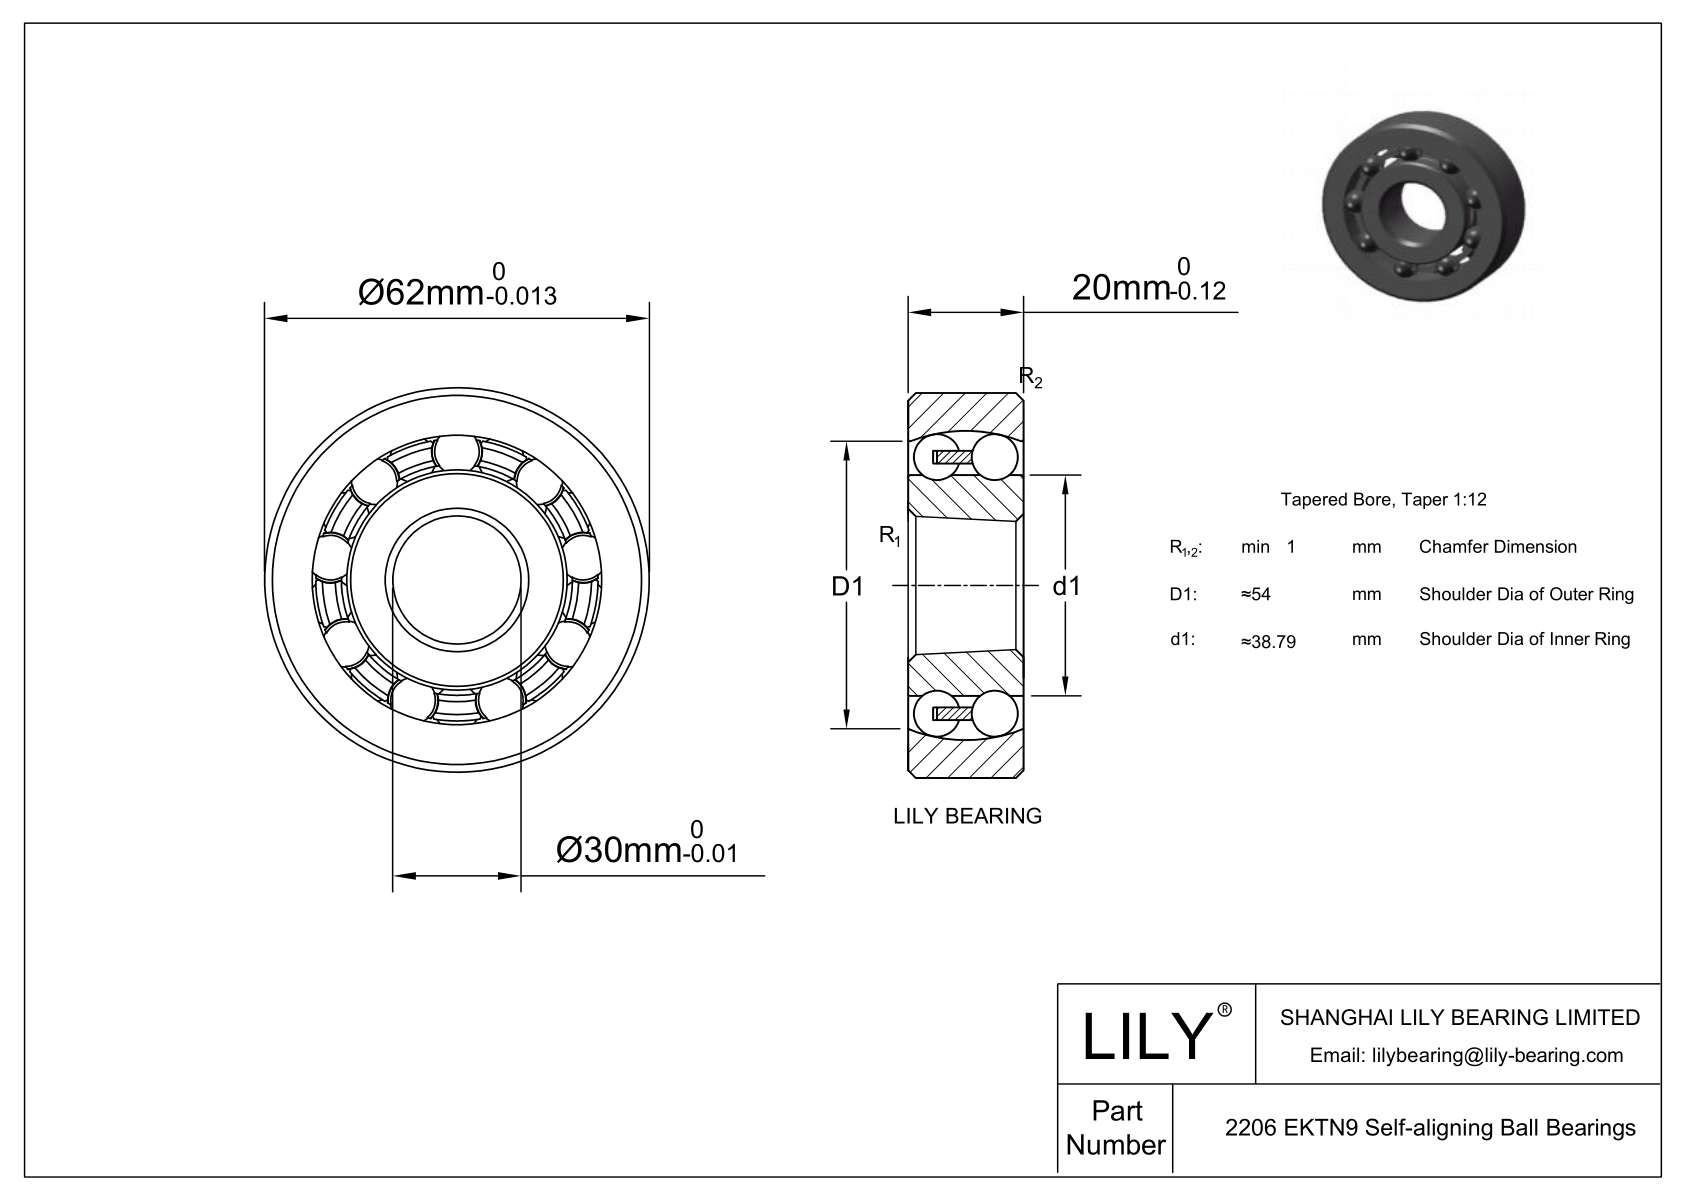 CE2206SC Silicon Carbide Self Aligning Ball Bearings cad drawing